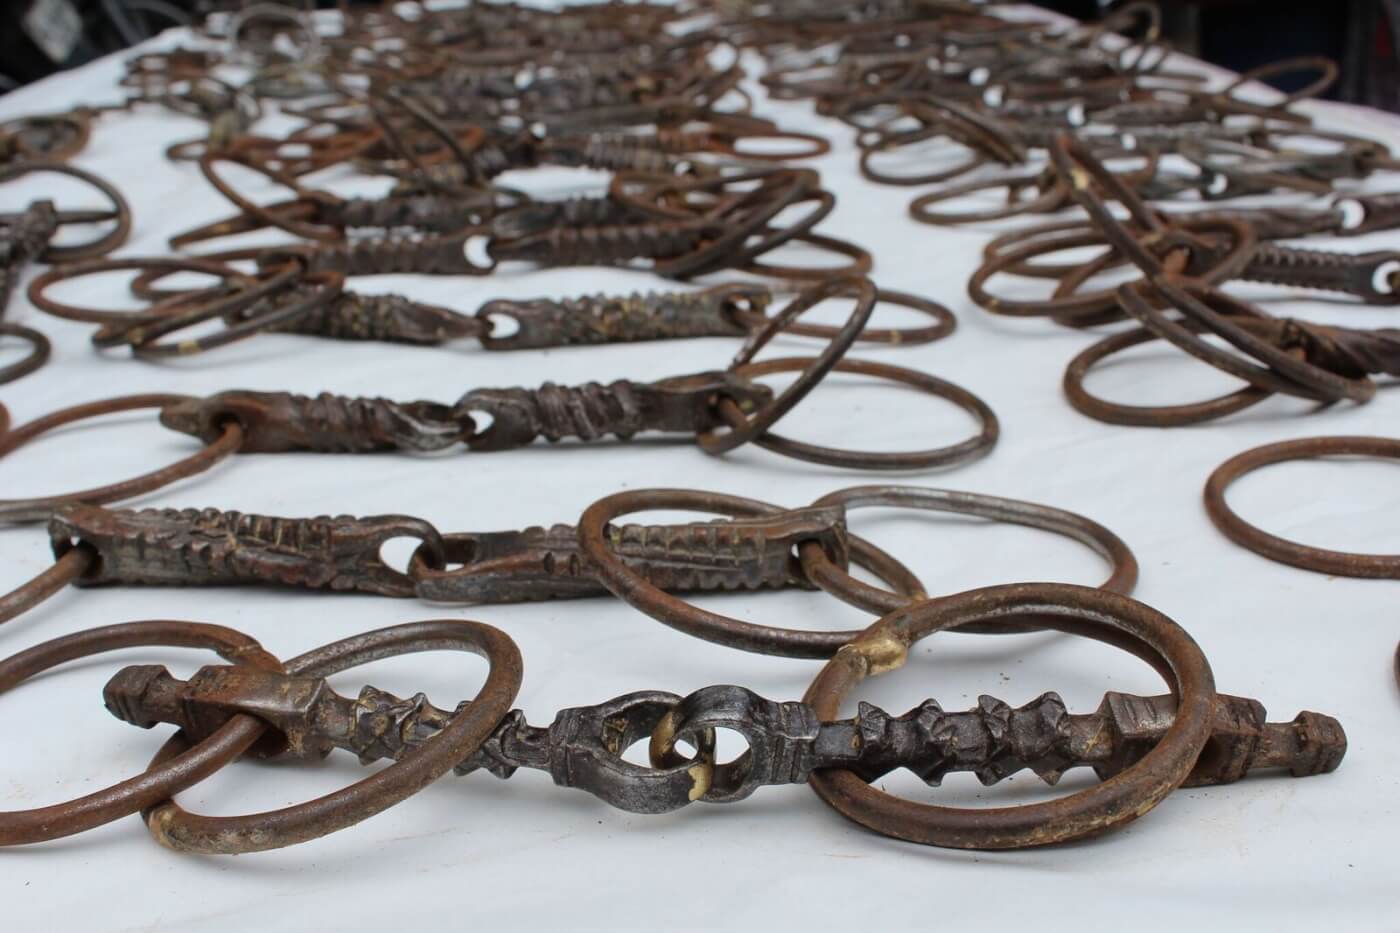 Delhi Police and PETA India Display Over 50 Seized Spiked Bits Used To Control Horses in Weddings